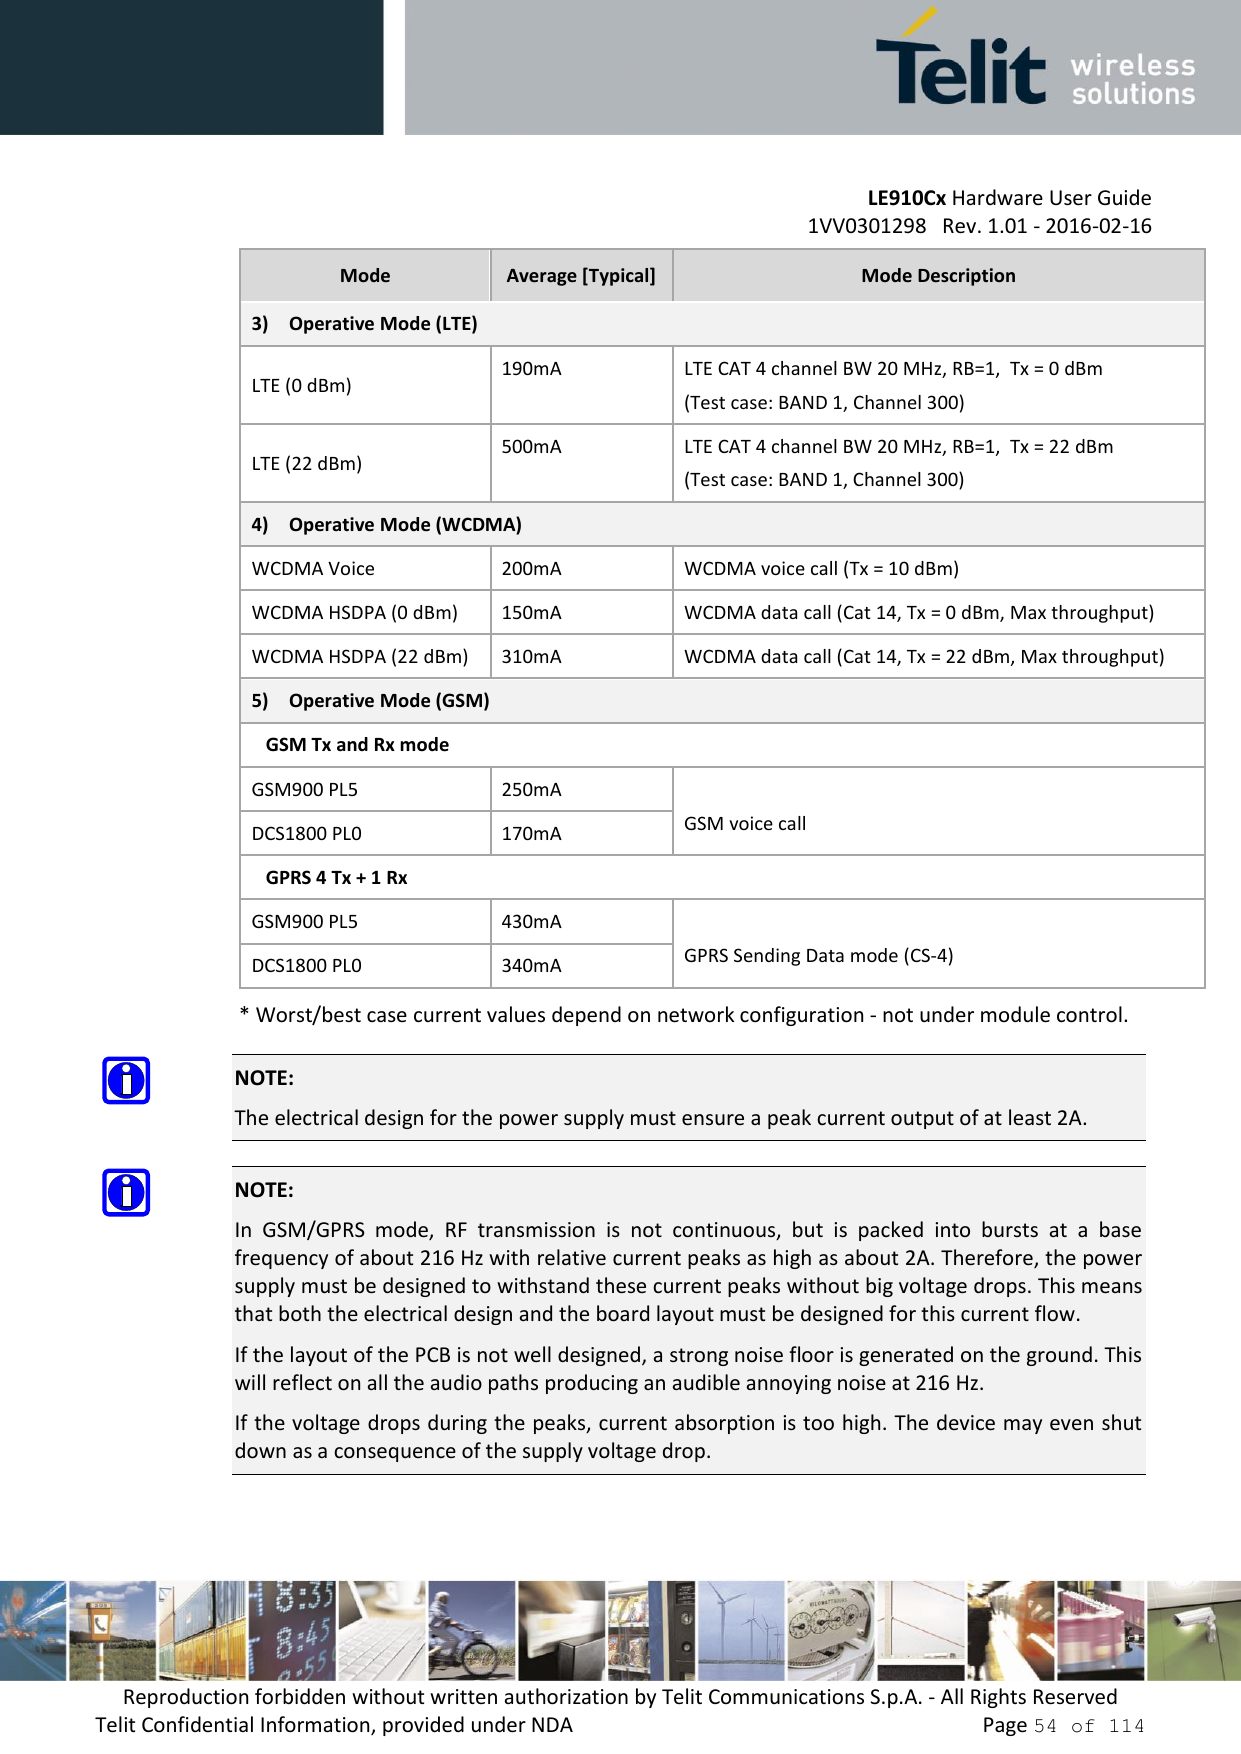         LE910Cx Hardware User Guide     1VV0301298   Rev. 1.01 - 2016-02-16 Reproduction forbidden without written authorization by Telit Communications S.p.A. - All Rights Reserved Telit Confidential Information, provided under NDA                 Page 54 of 114 Mode Average [Typical] Mode Description 3) Operative Mode (LTE) LTE (0 dBm) 190mA LTE CAT 4 channel BW 20 MHz, RB=1,  Tx = 0 dBm  (Test case: BAND 1, Channel 300) LTE (22 dBm) 500mA LTE CAT 4 channel BW 20 MHz, RB=1,  Tx = 22 dBm  (Test case: BAND 1, Channel 300) 4) Operative Mode (WCDMA) WCDMA Voice 200mA WCDMA voice call (Tx = 10 dBm) WCDMA HSDPA (0 dBm) 150mA WCDMA data call (Cat 14, Tx = 0 dBm, Max throughput) WCDMA HSDPA (22 dBm) 310mA WCDMA data call (Cat 14, Tx = 22 dBm, Max throughput) 5) Operative Mode (GSM)    GSM Tx and Rx mode GSM900 PL5 250mA  GSM voice call DCS1800 PL0 170mA    GPRS 4 Tx + 1 Rx GSM900 PL5 430mA  GPRS Sending Data mode (CS-4) DCS1800 PL0 340mA * Worst/best case current values depend on network configuration - not under module control.  NOTE: The electrical design for the power supply must ensure a peak current output of at least 2A.  NOTE: In  GSM/GPRS  mode,  RF  transmission  is  not  continuous,  but  is  packed  into  bursts  at  a  base frequency of about 216 Hz with relative current peaks as high as about 2A. Therefore, the power supply must be designed to withstand these current peaks without big voltage drops. This means that both the electrical design and the board layout must be designed for this current flow.  If the layout of the PCB is not well designed, a strong noise floor is generated on the ground. This will reflect on all the audio paths producing an audible annoying noise at 216 Hz.  If the voltage drops during the peaks, current absorption is too high. The device may even shut down as a consequence of the supply voltage drop.  